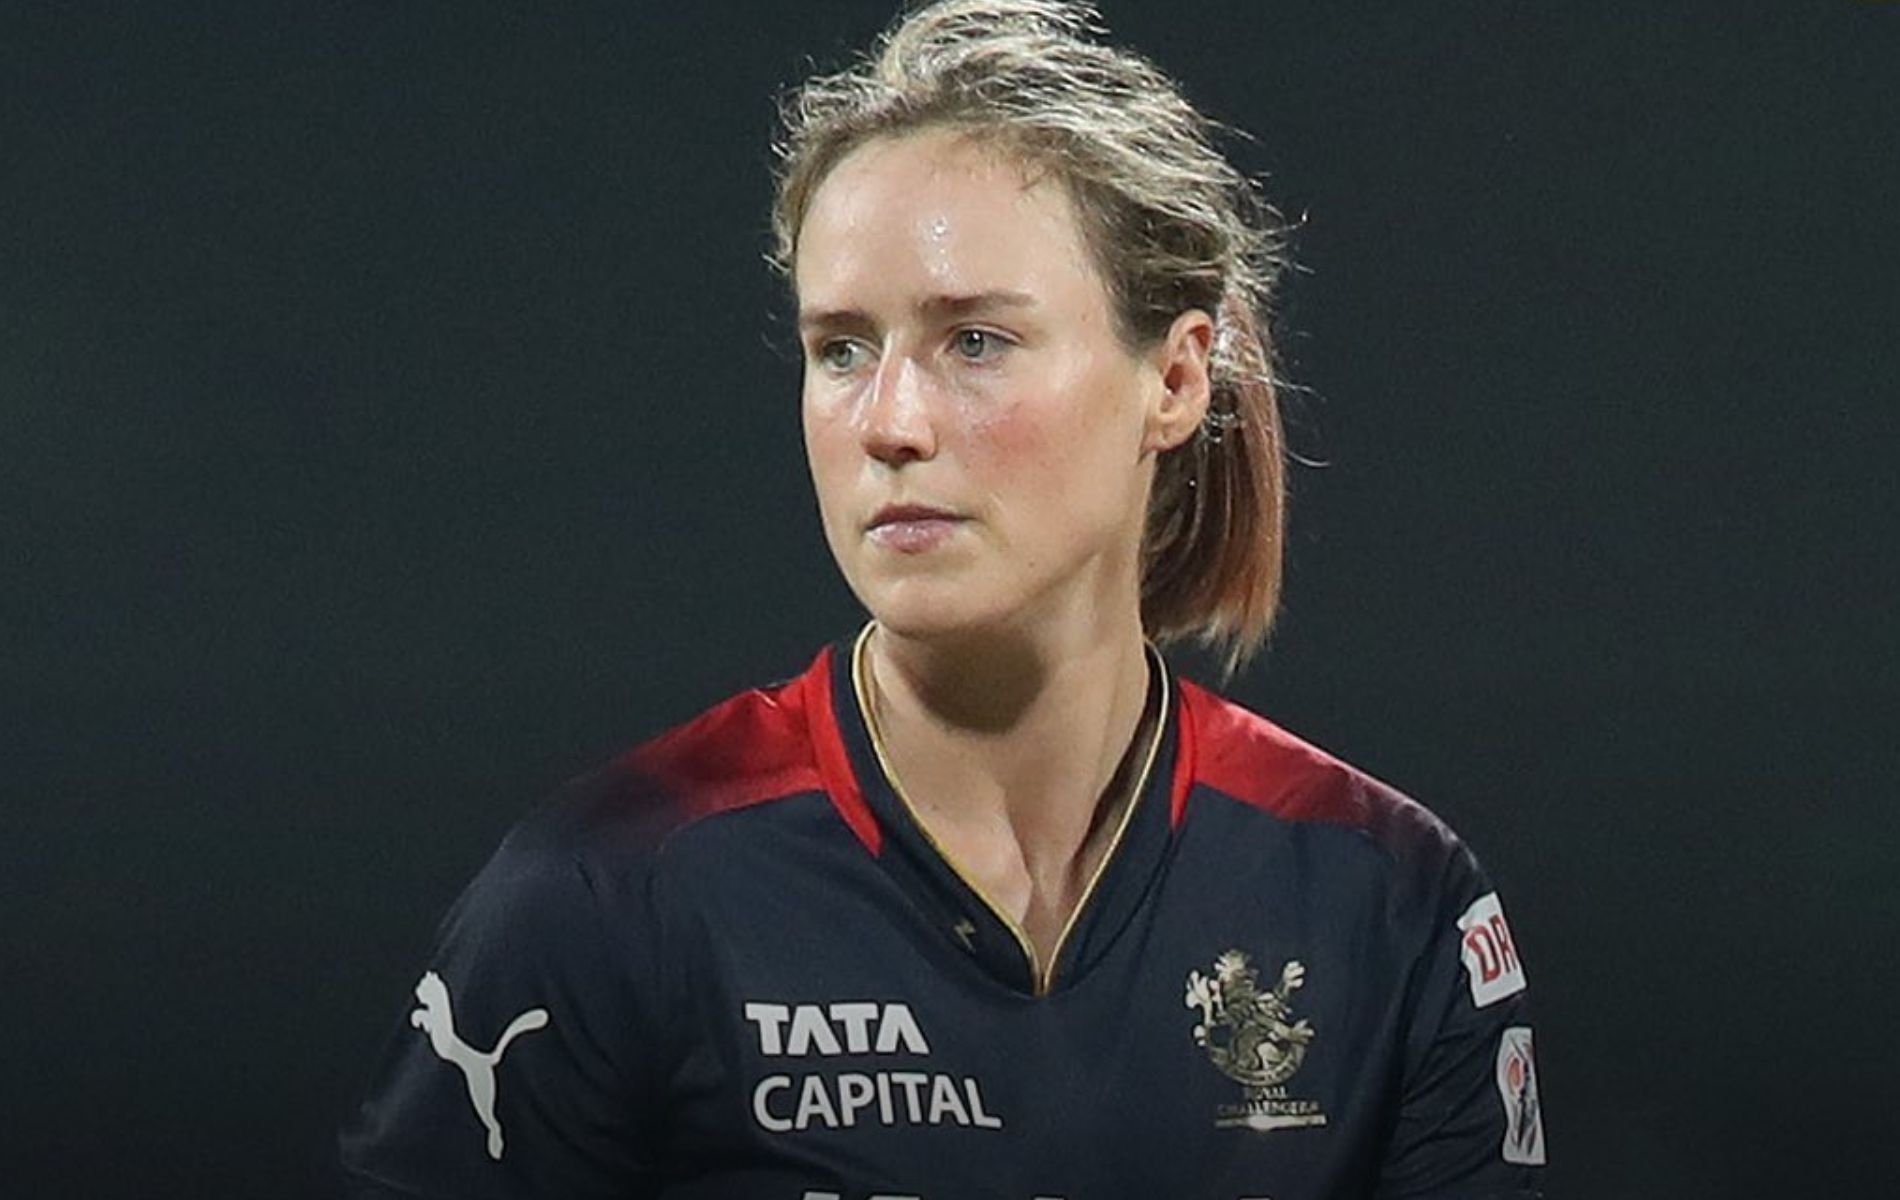 Ellyse Perry is currently RCB